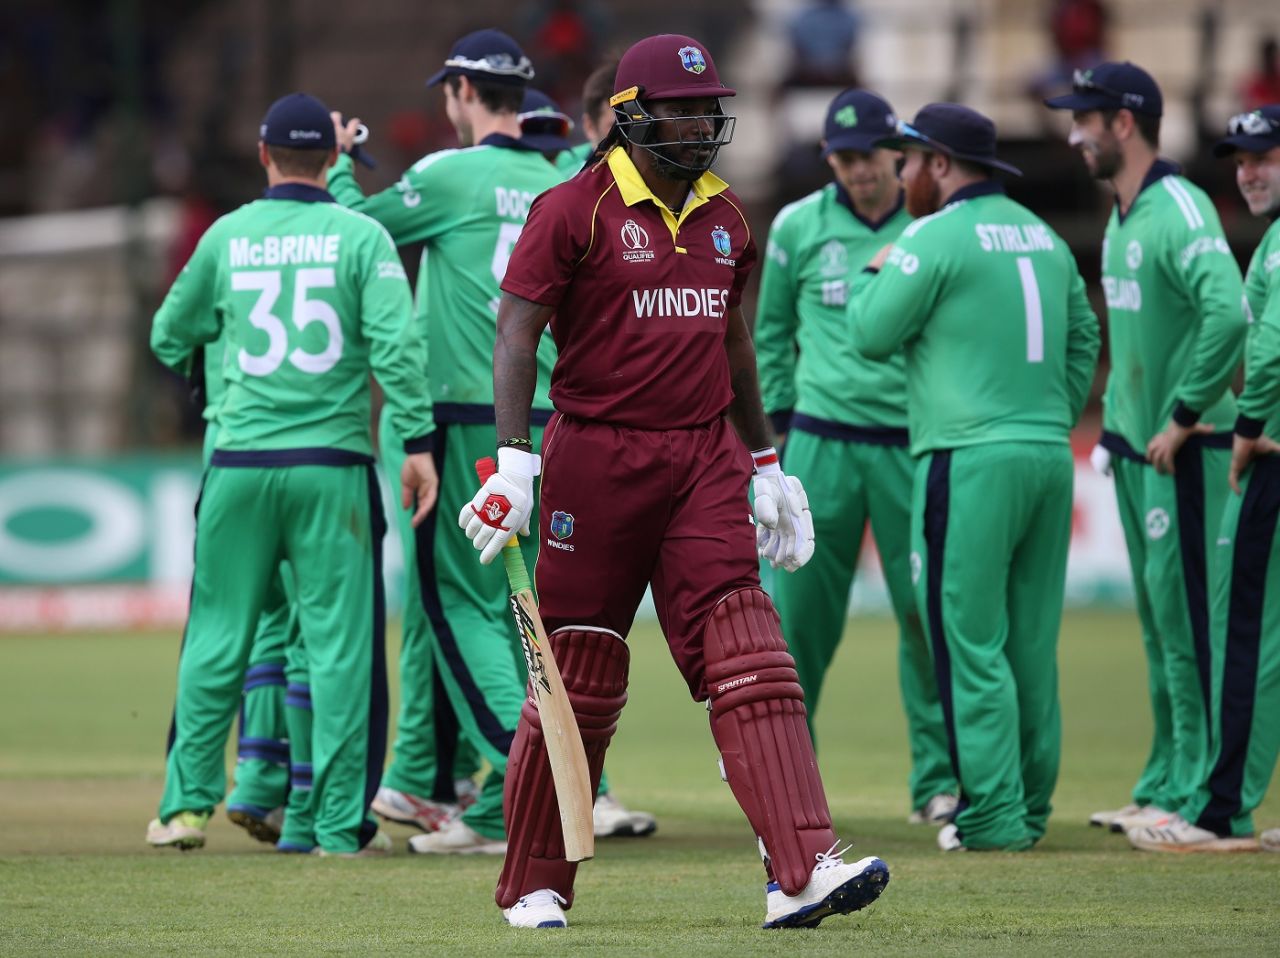 Chris Gayle was dismissed by Tim Murtagh for 14 runs, West Indies v Ireland, Group A, World Cup Qualifiers, Harare, March 10, 2018